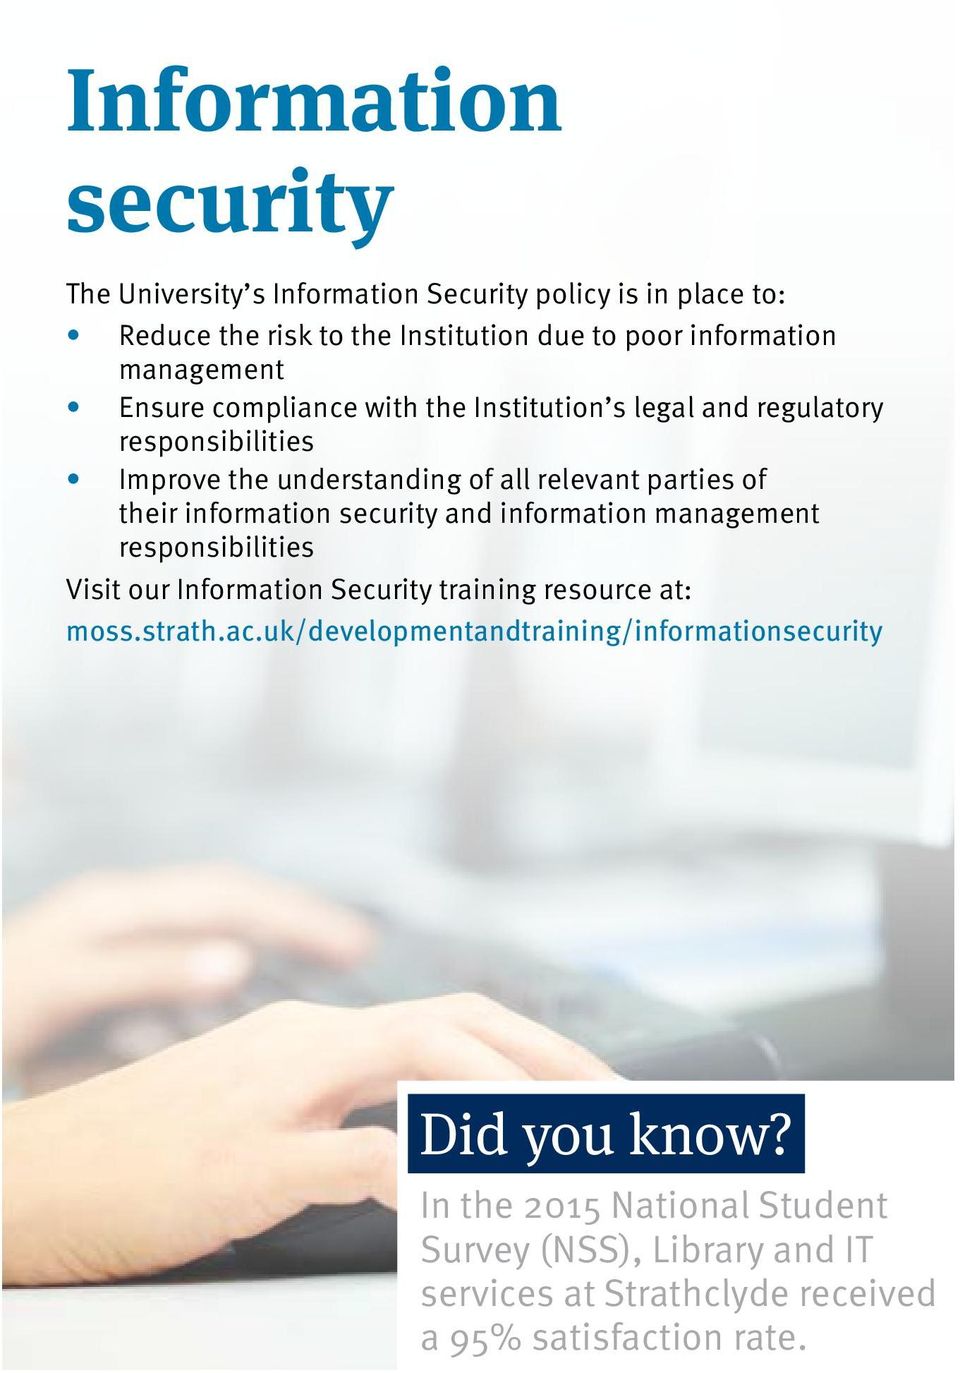 information security and information management responsibilities Visit our Information Security training resource at: moss.strath.ac.